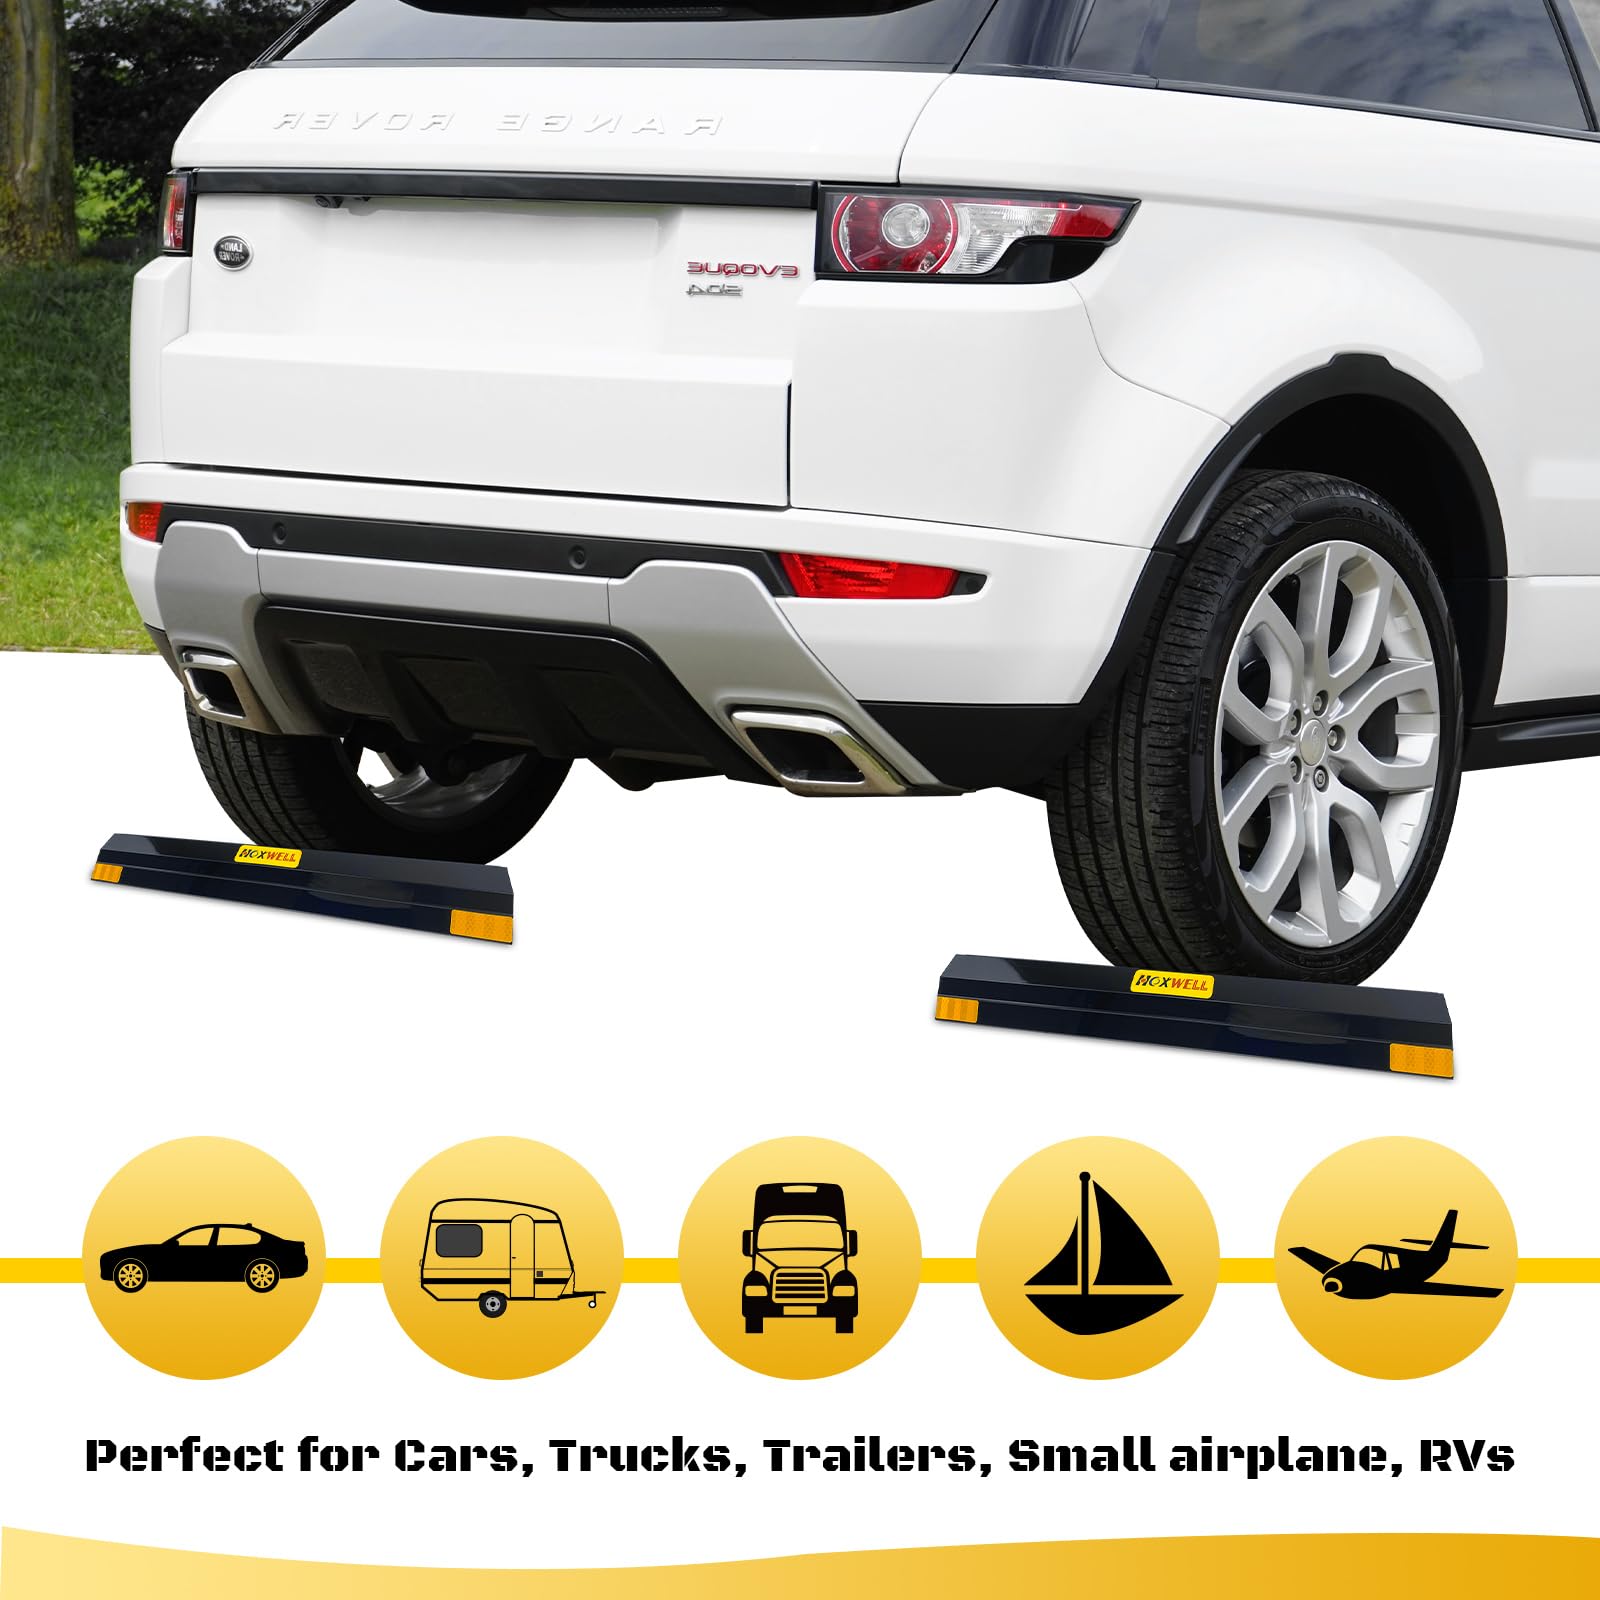 24 Inch (New Upgrade) 2 PCS Heavy Duty Car Parking Stopper for Garage, Parking Aid Protects Car, Parking Gadgets Easy to Install 2 Packs, 24" L x 3.7" W x 1.8" H